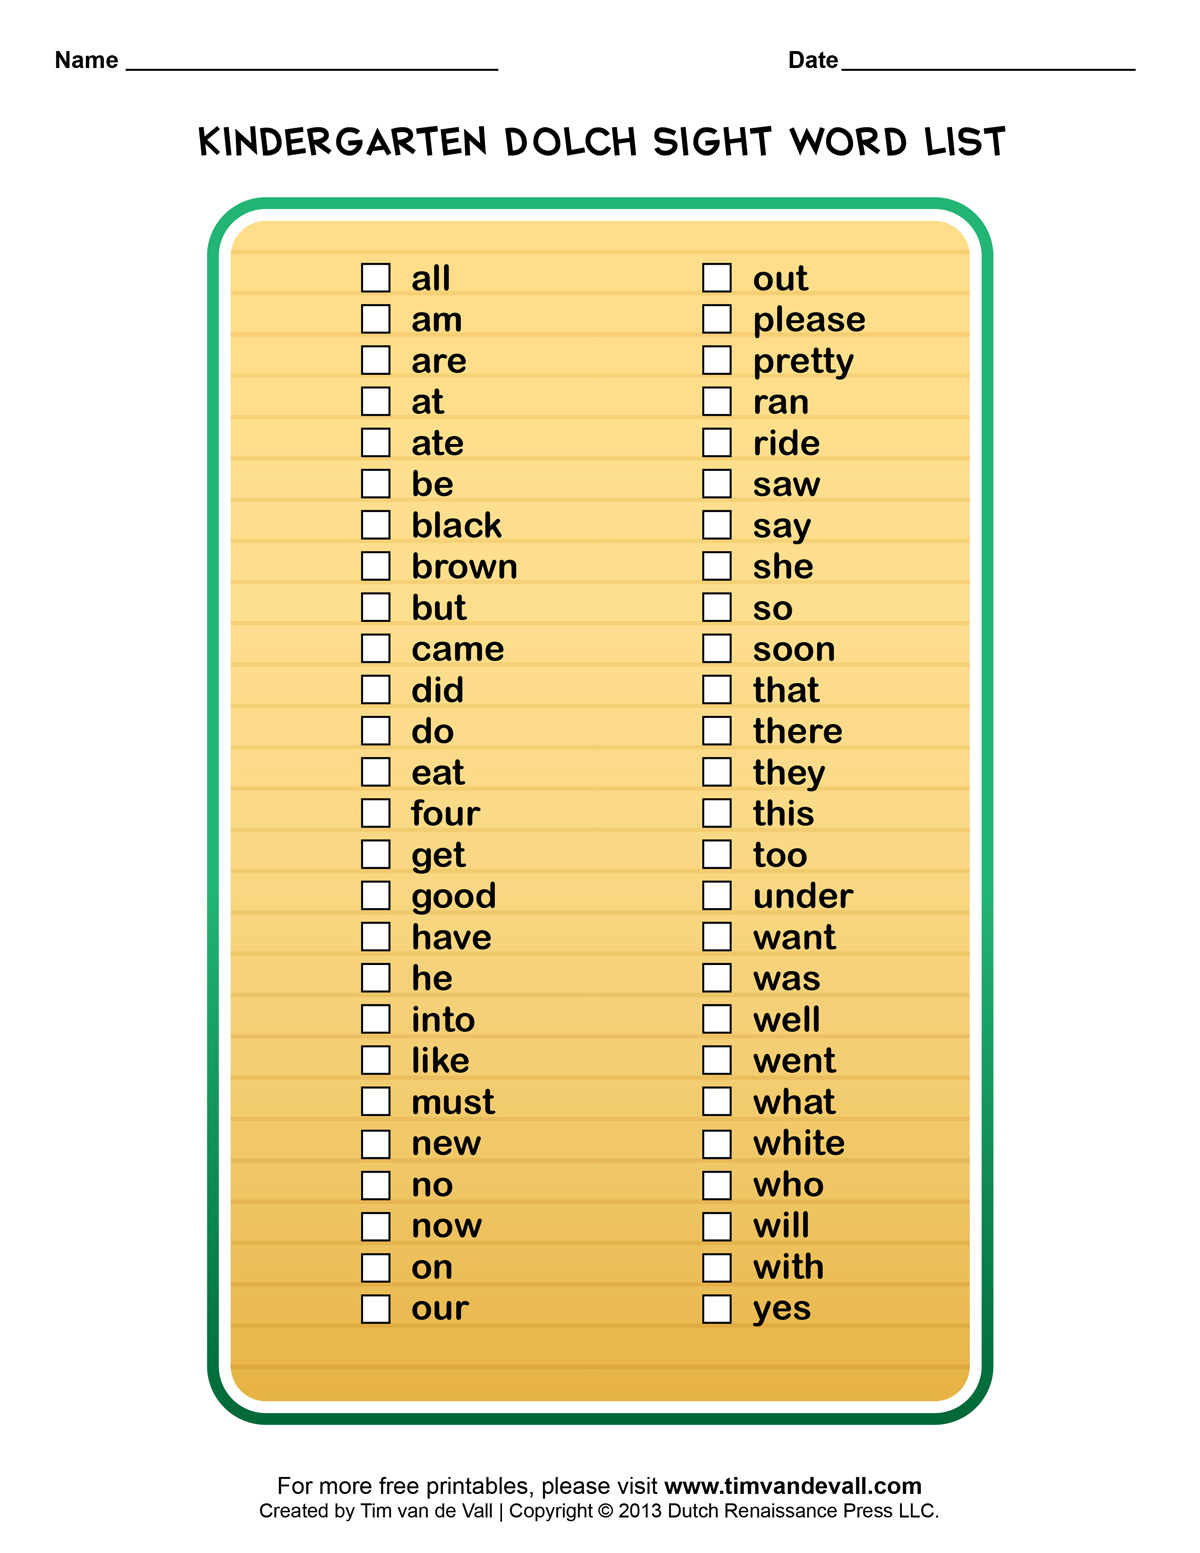 dolch-sight-words-dolch-first-grade-sight-word-worksheets